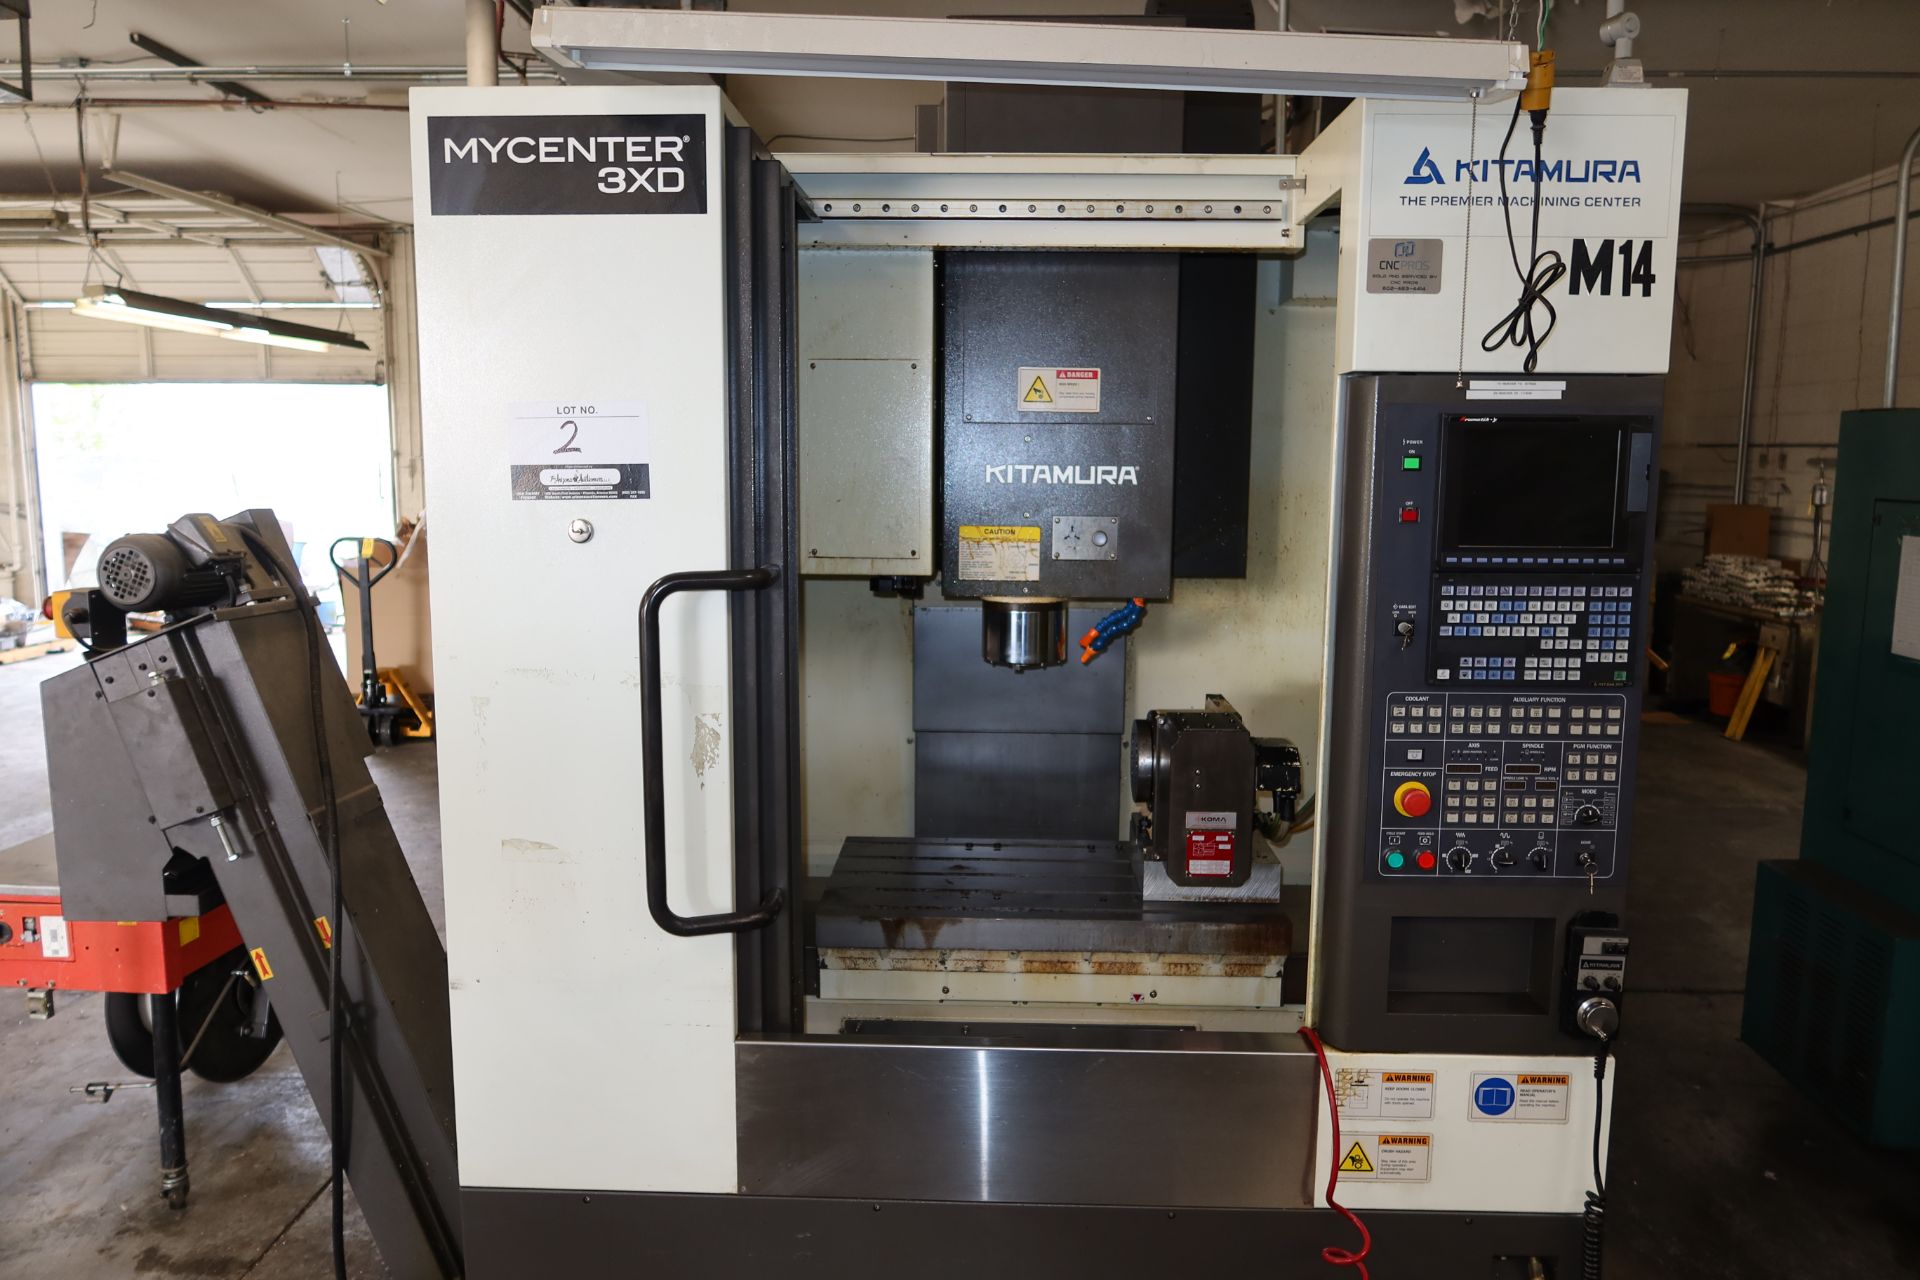 2015 KITAMURA MYCENTER 3XD CNC VERTICAL MACHINING CENTER W/KOMA 4TH AXIS, 12000 RPM SPINDLE, 24-TOOL